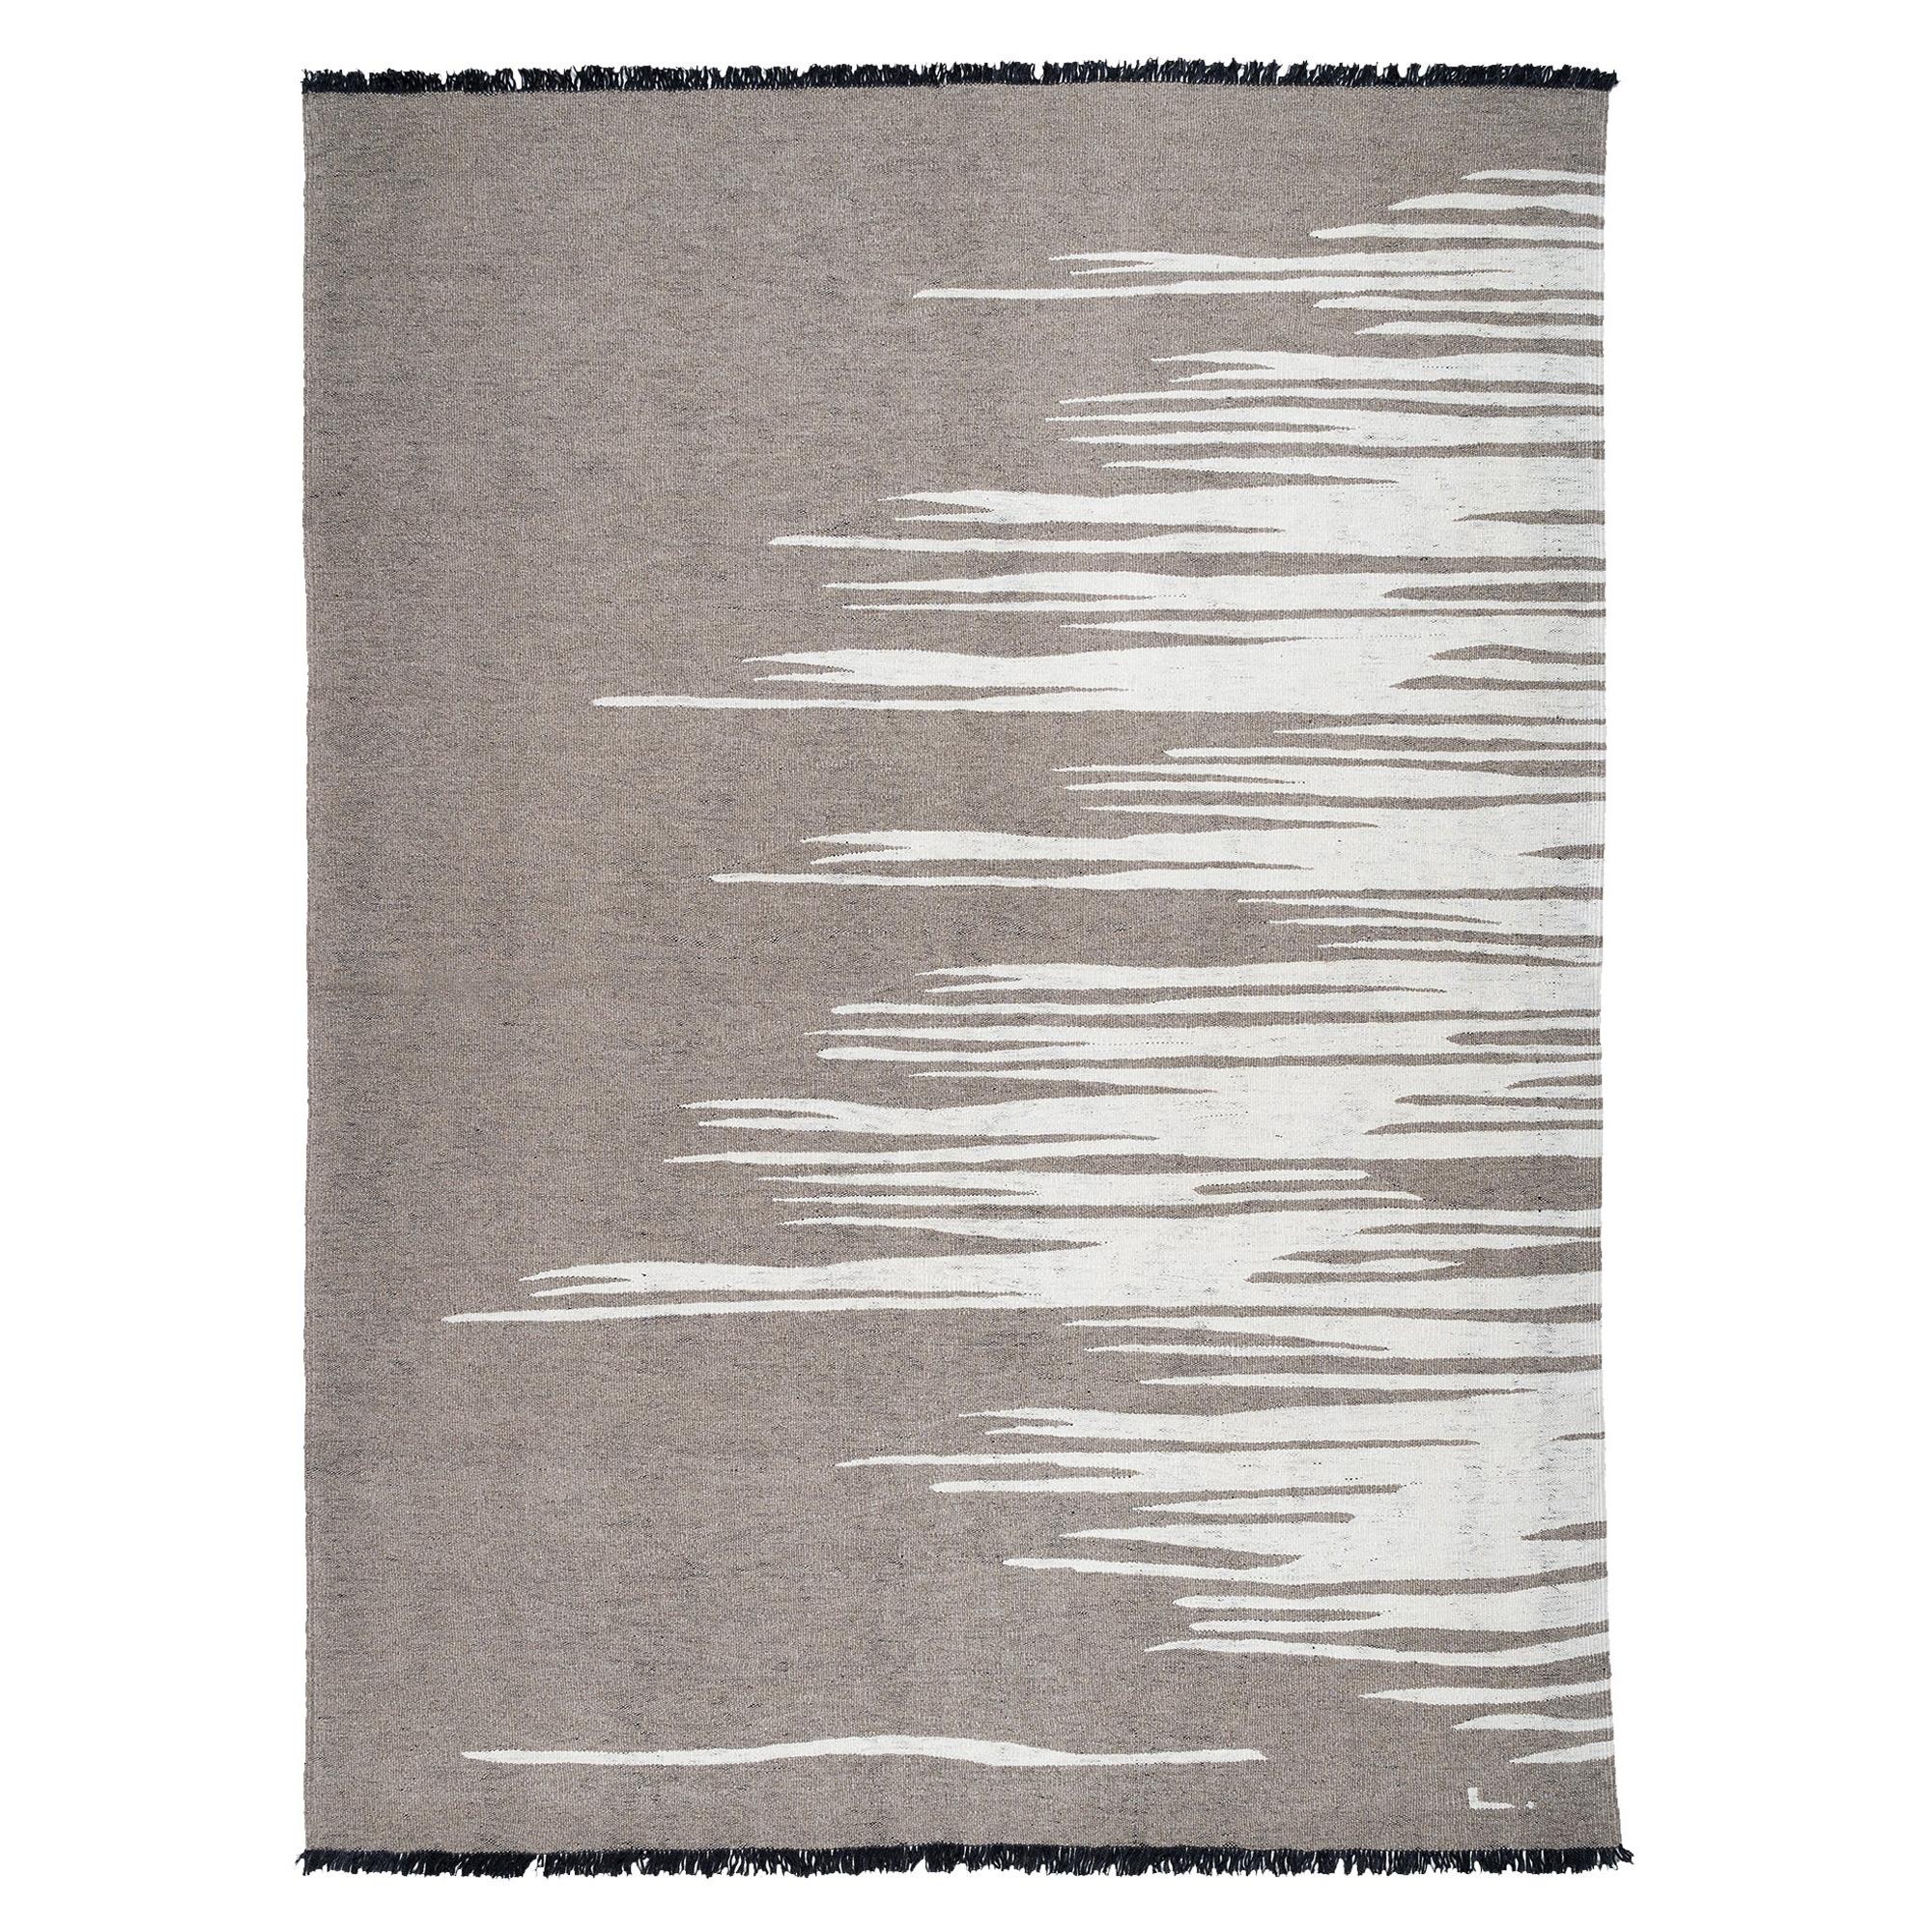 Handwoven Wool Kilim Rug Ege No 3, Contemporary Earthy Gray and Dune White